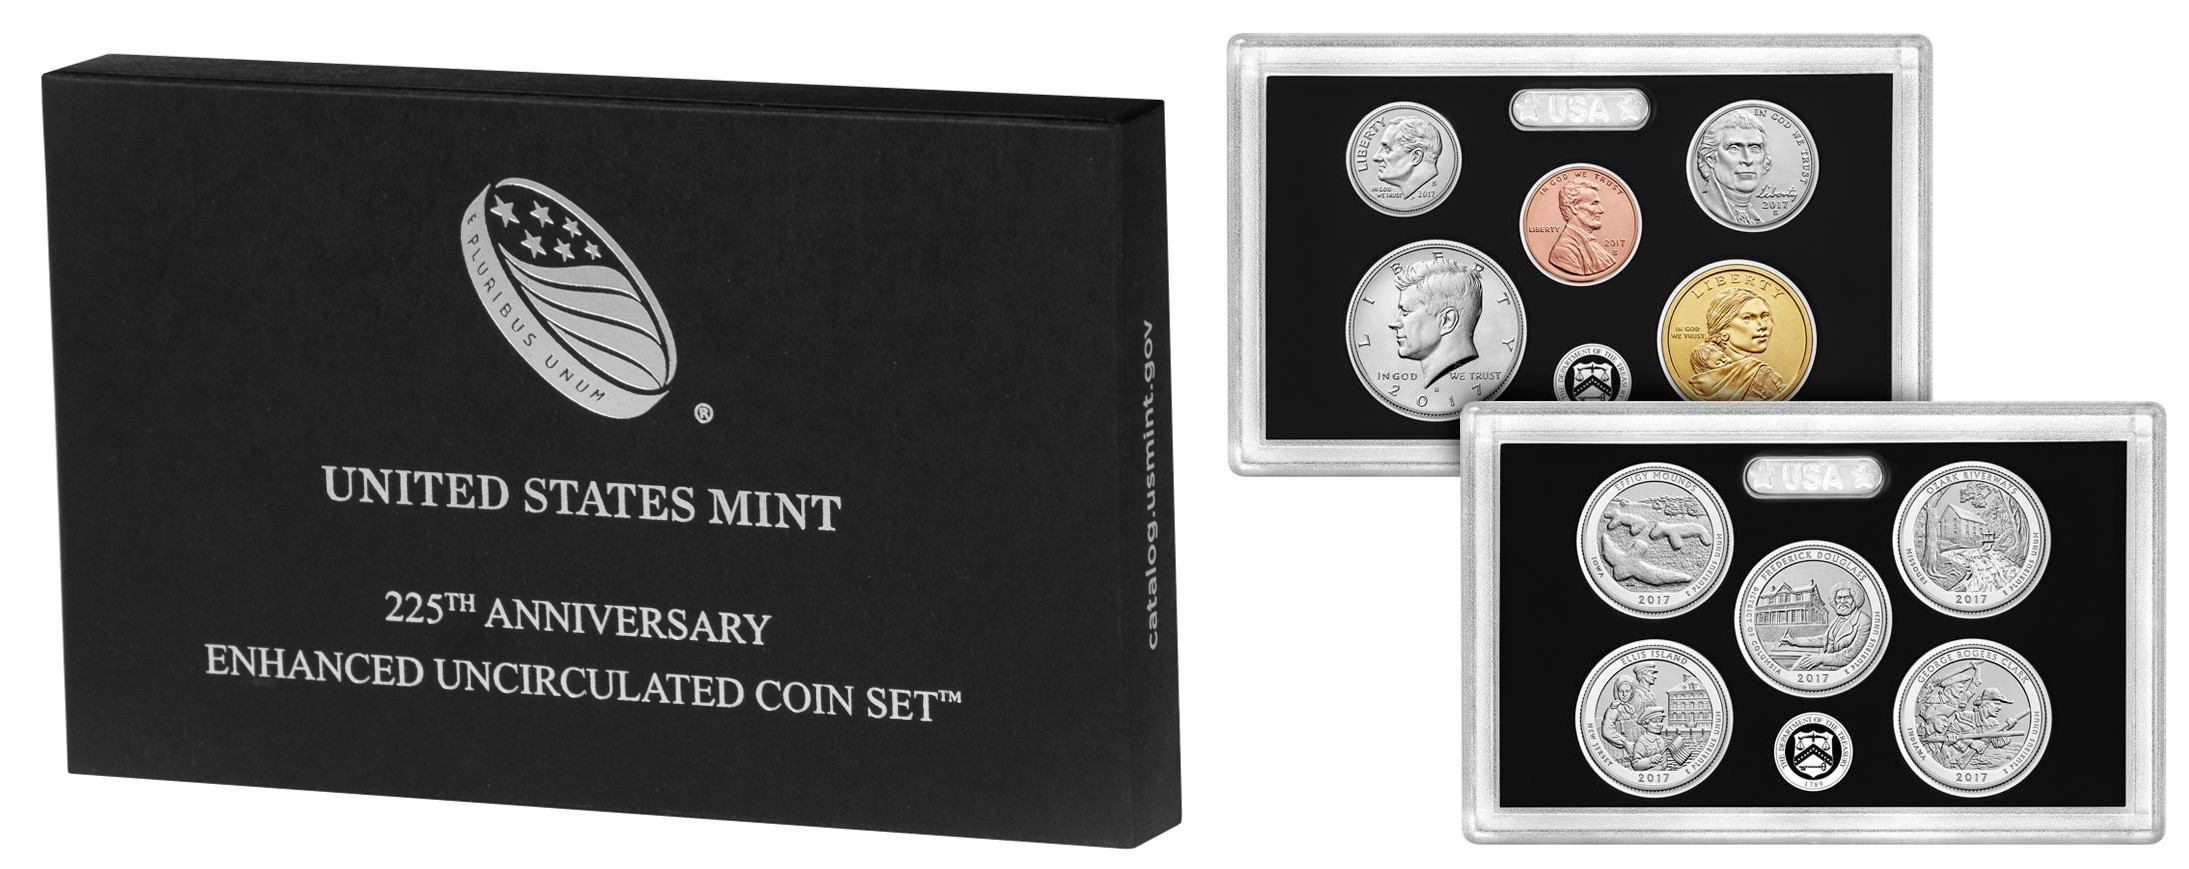 2017 S 225th Anniversary Enhanced Uncirculated Coin Set Uncirculated 